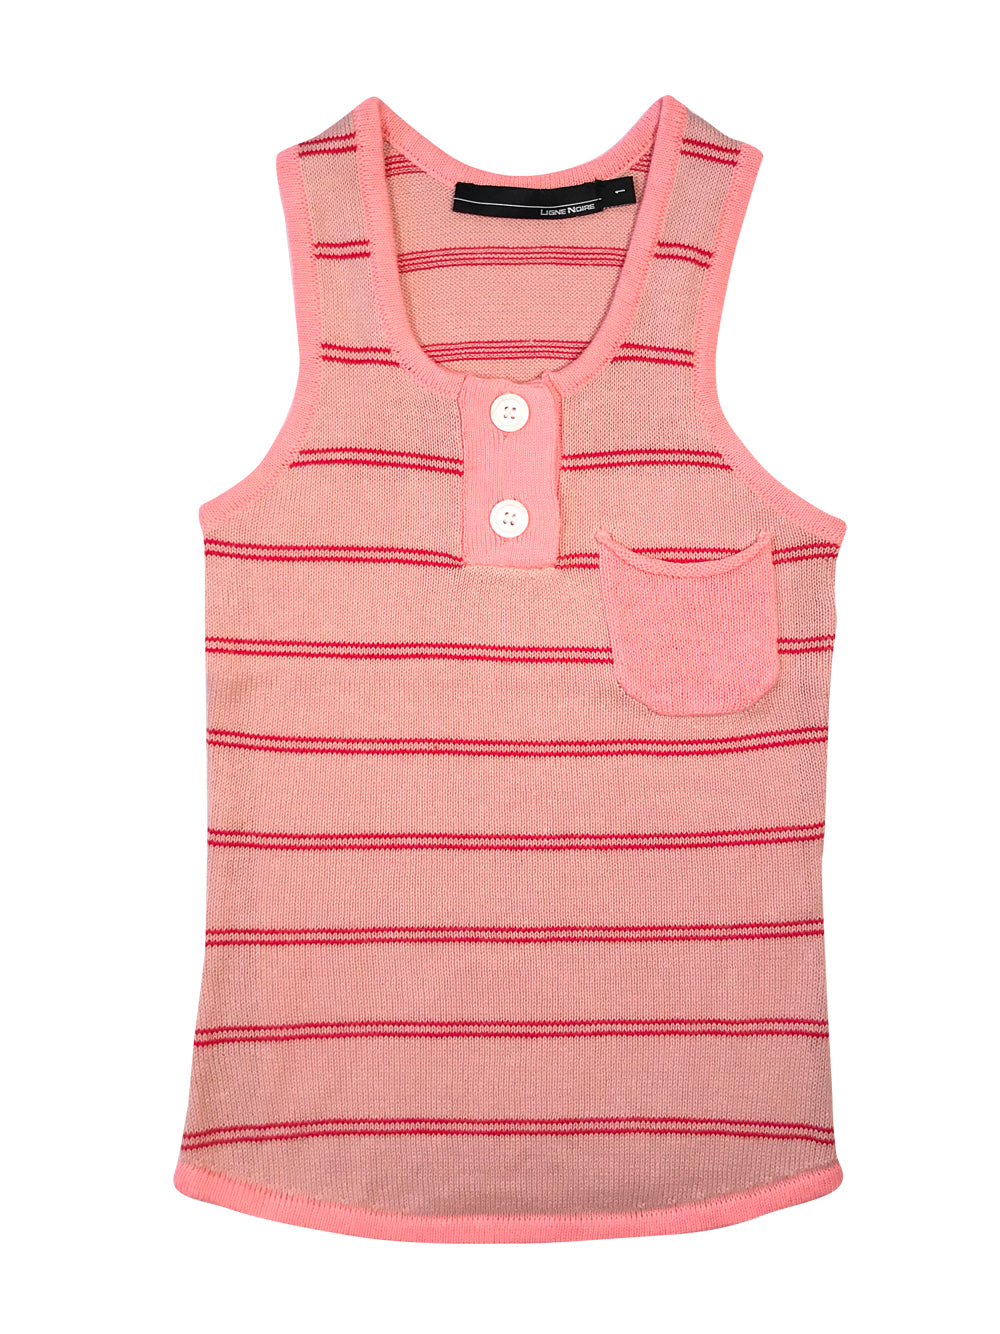 Vintage Pink and Red Tank